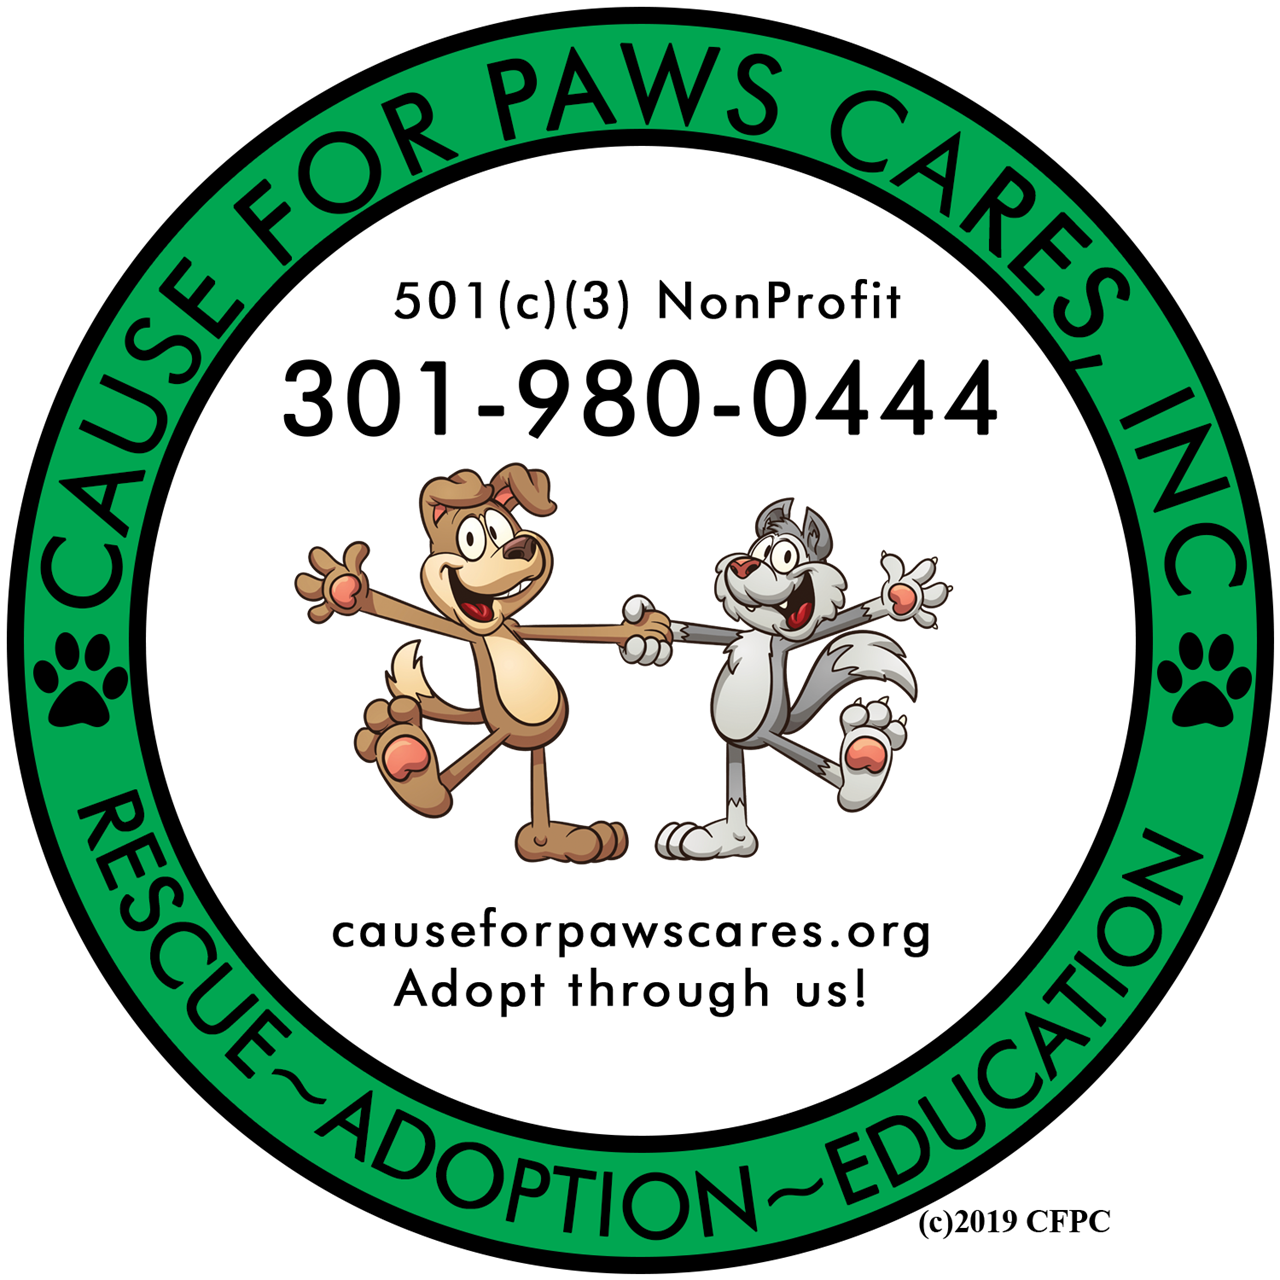 Home to Cause for Paws Cares We Are All About the Animals1280 x 1280